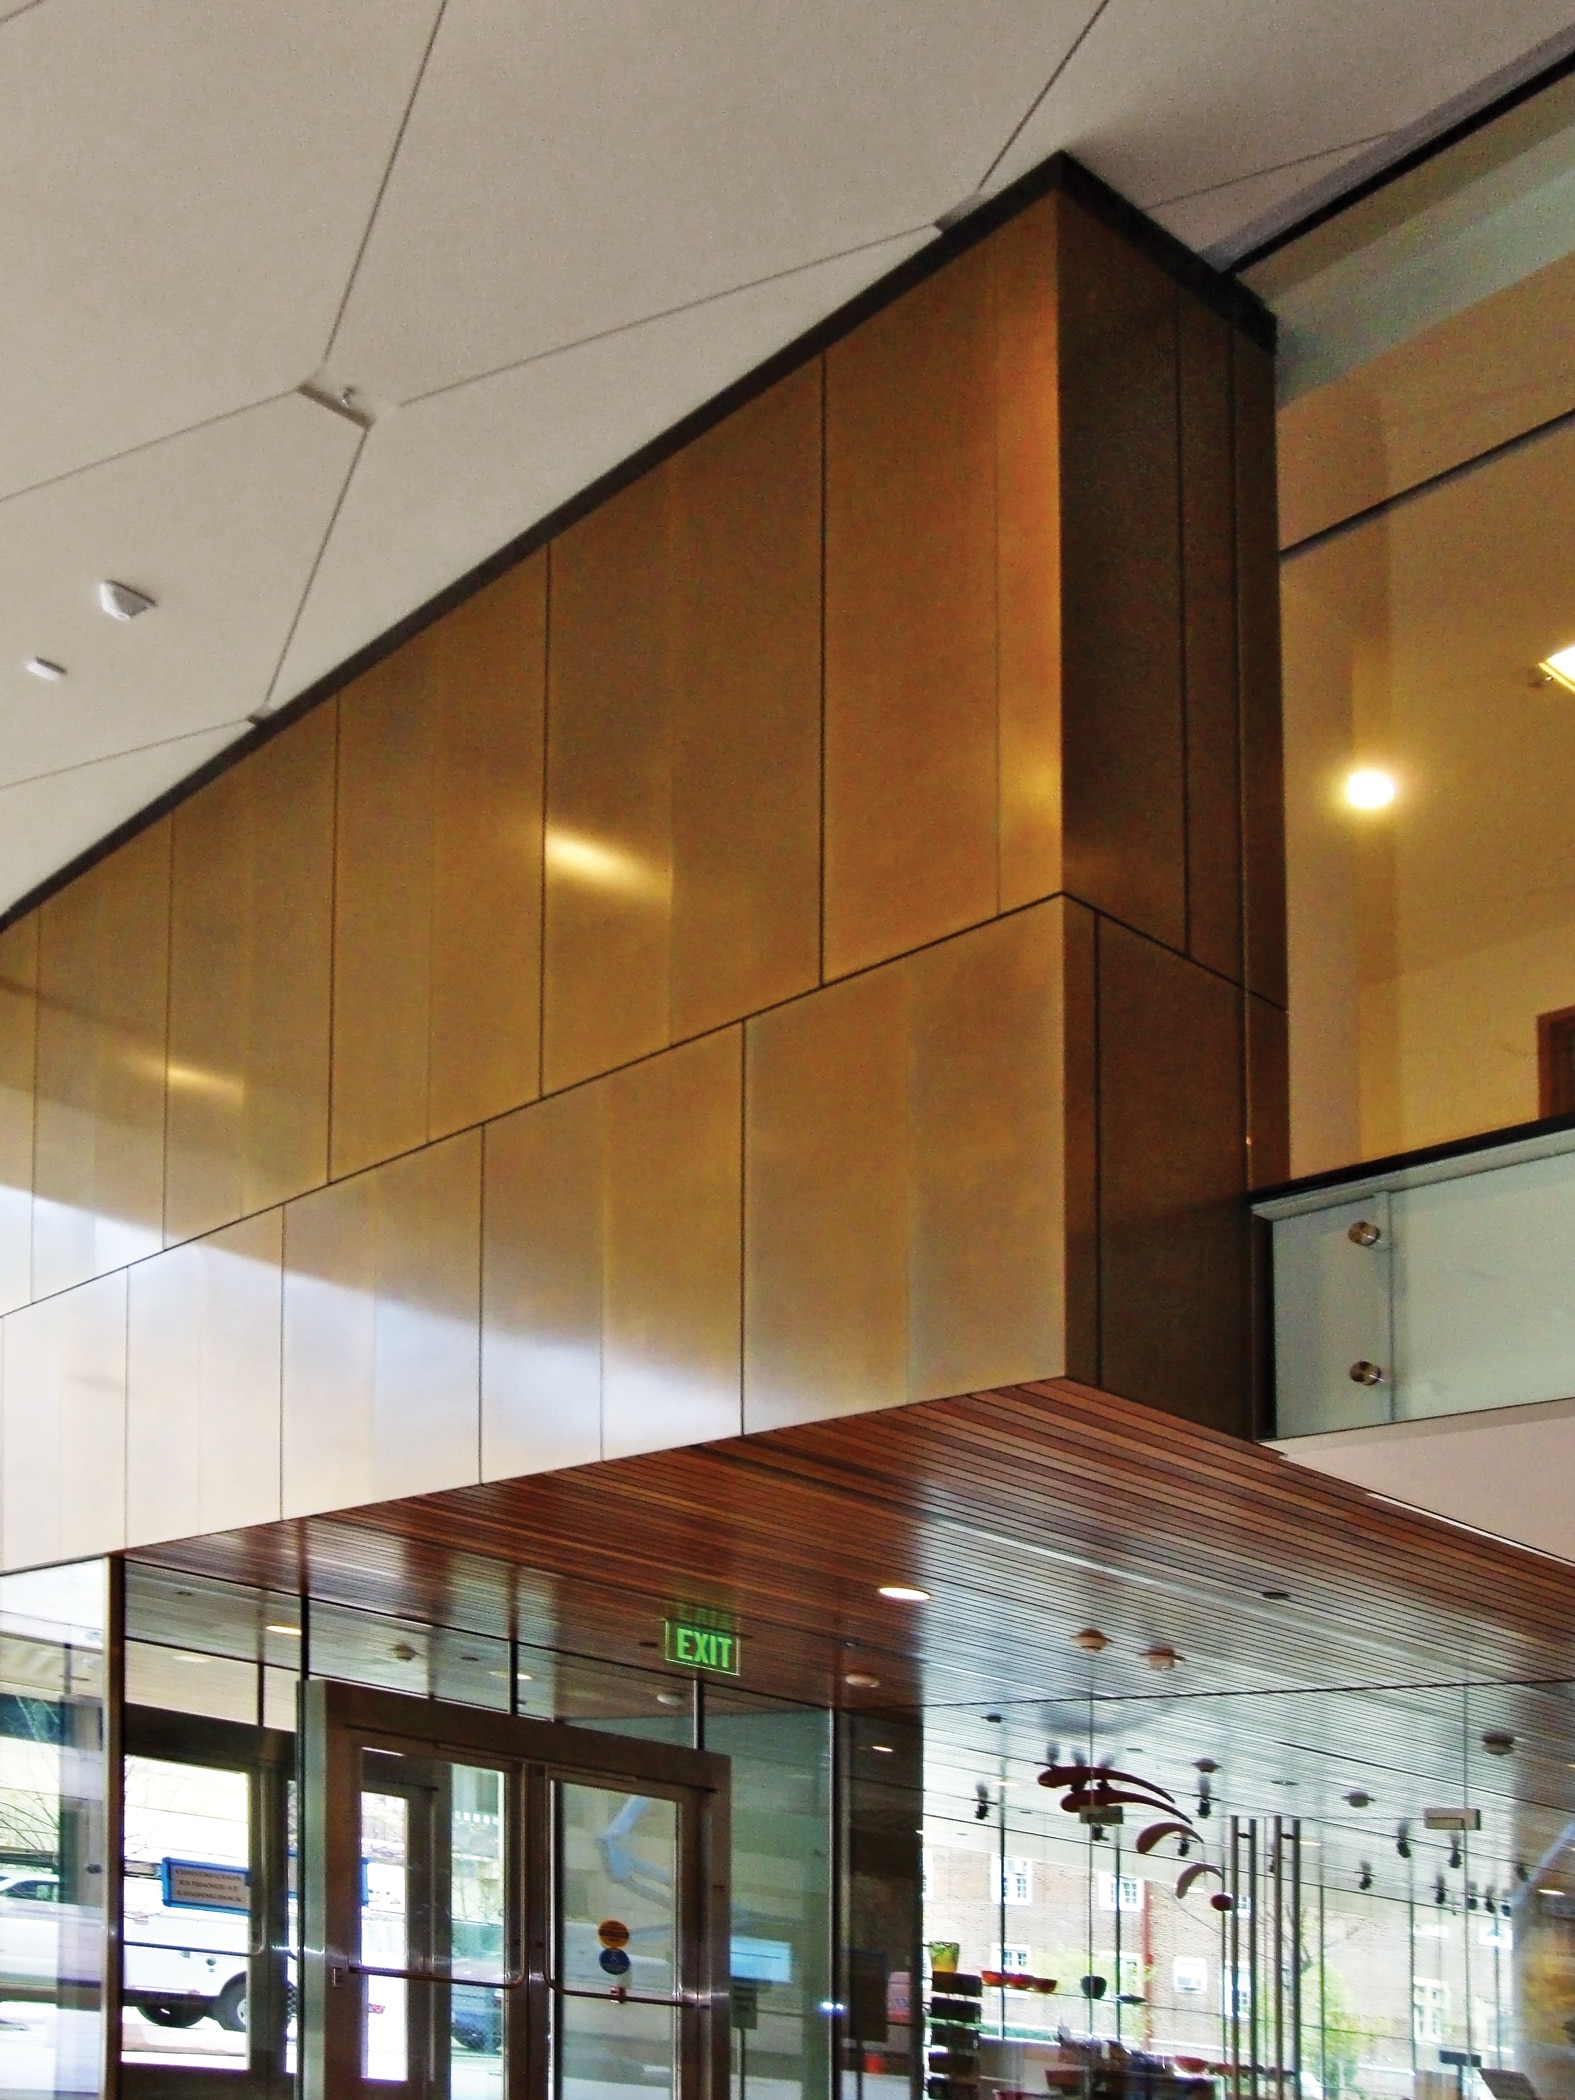 Image at Chazen Museum of Art shows patined bronze interior surface. Architectural system by Riverside Group.